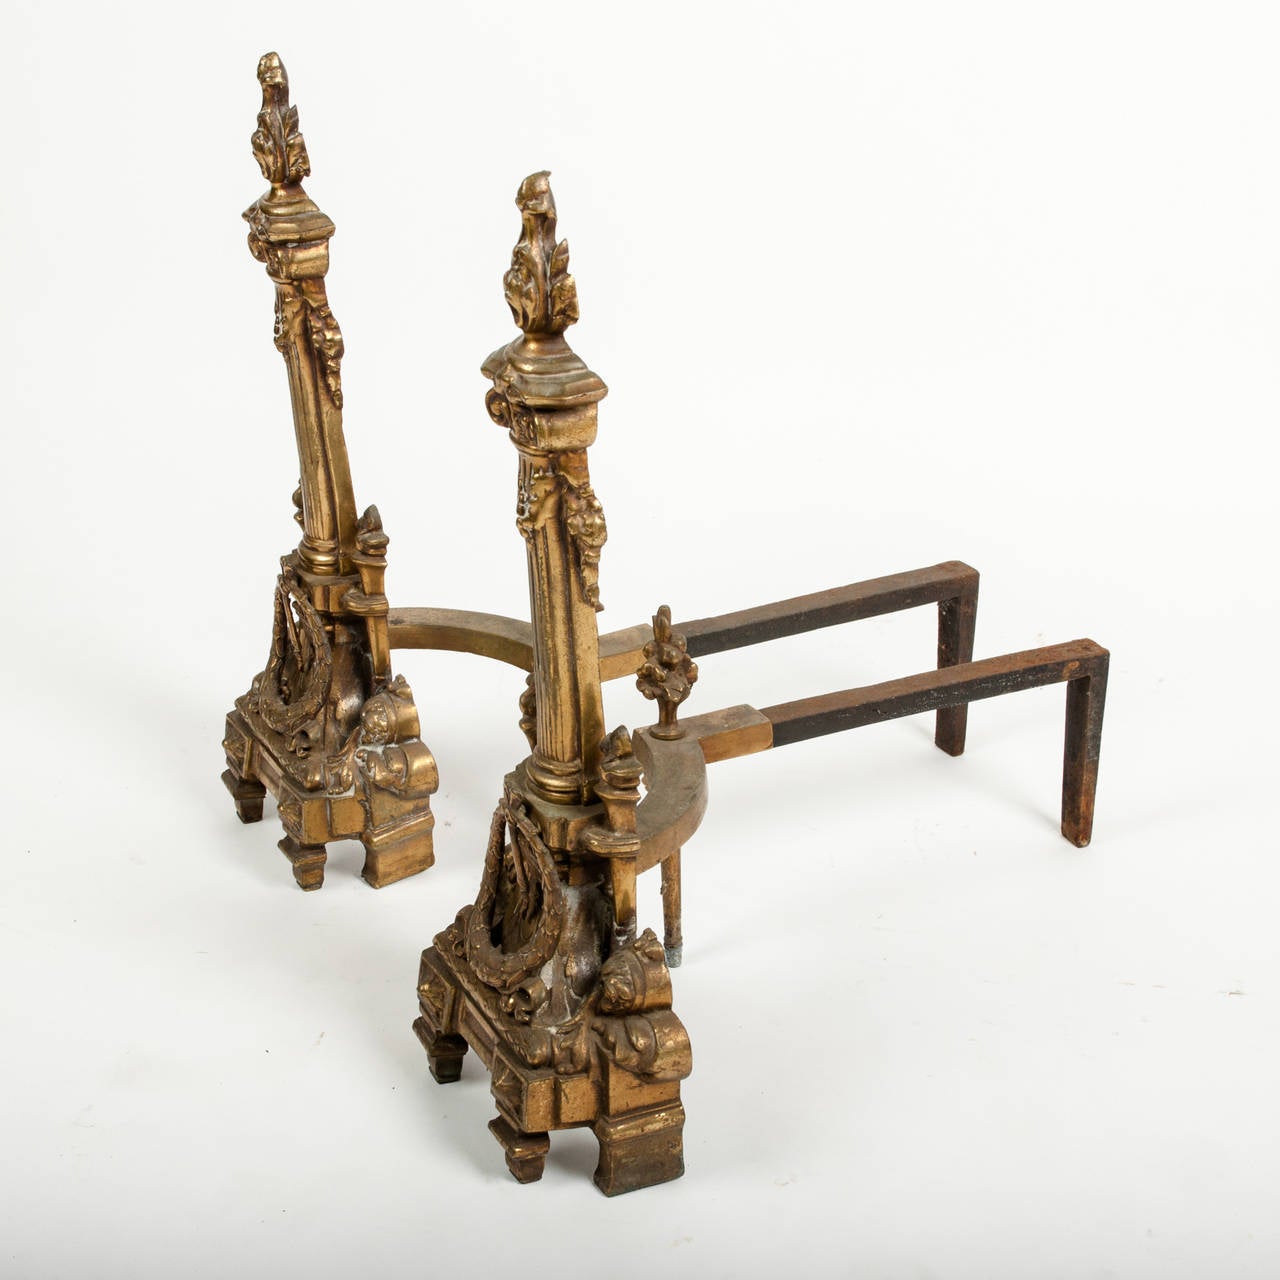 A vintage pair of ornate bronze andirons signed 